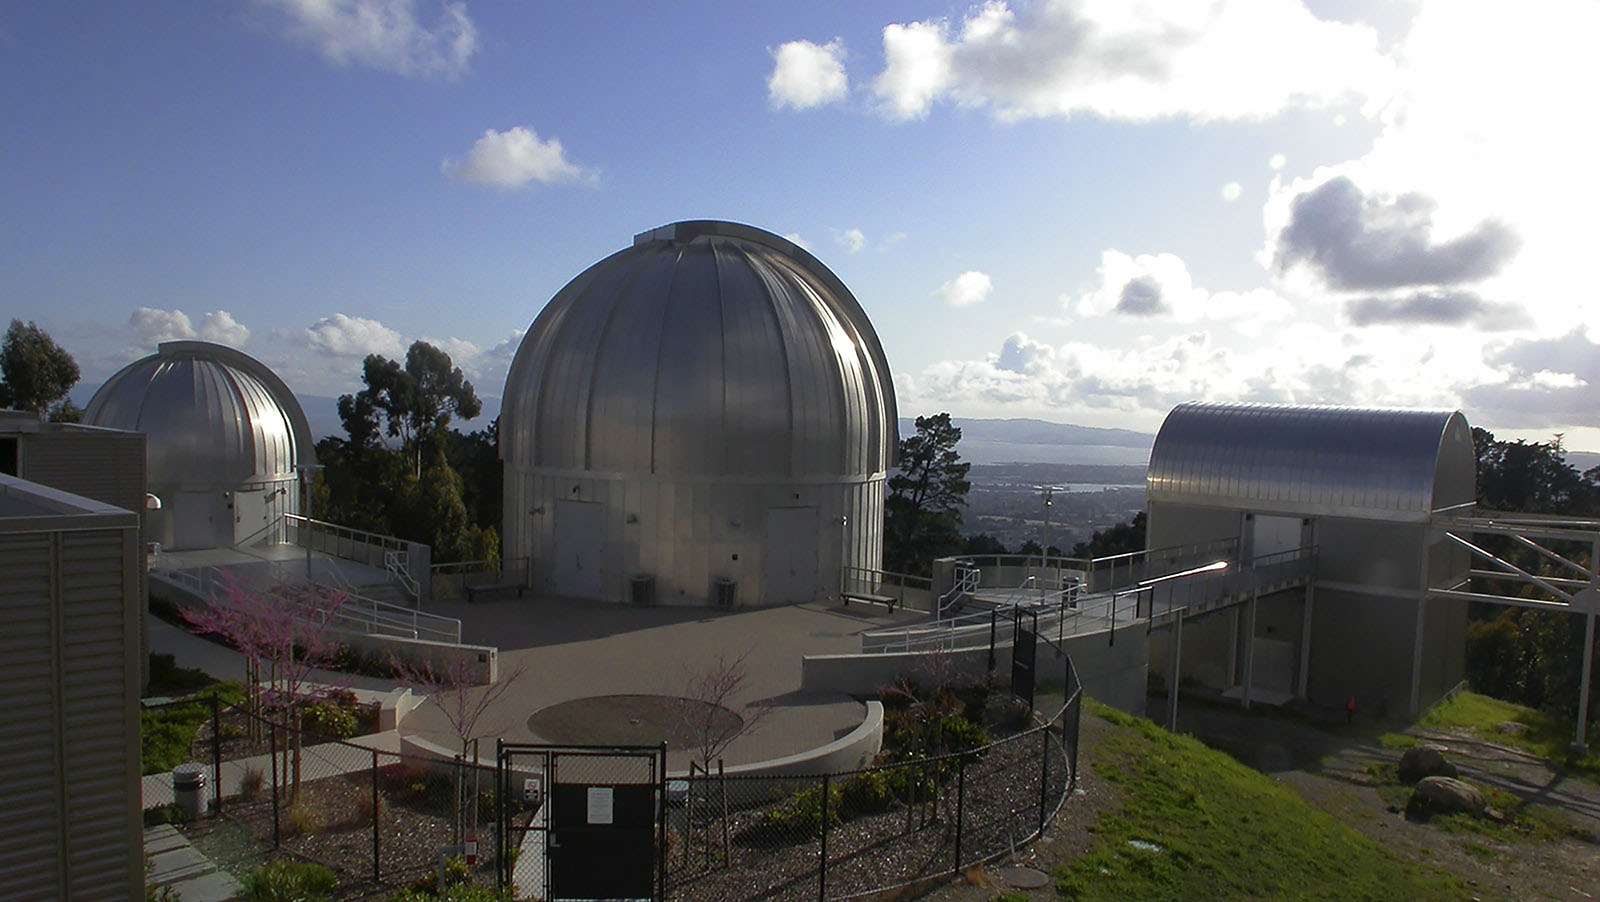 Chabot Space and Science Center in Oakland's roof telescope dome